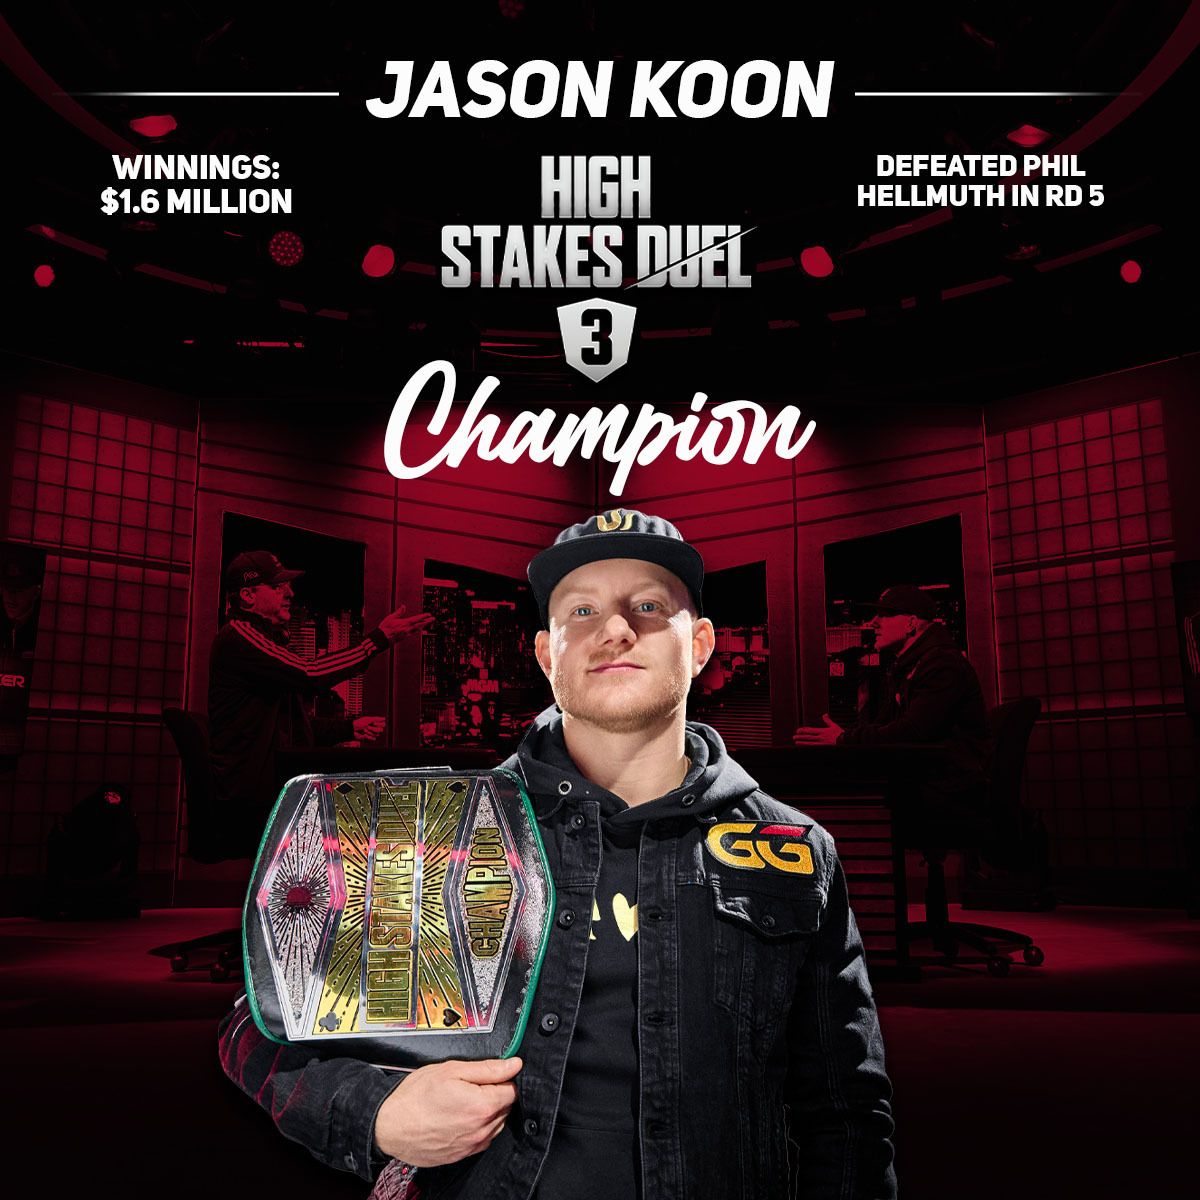 With No Challenger, Jason Koon Wins $1.6 Million on High Stakes Duel